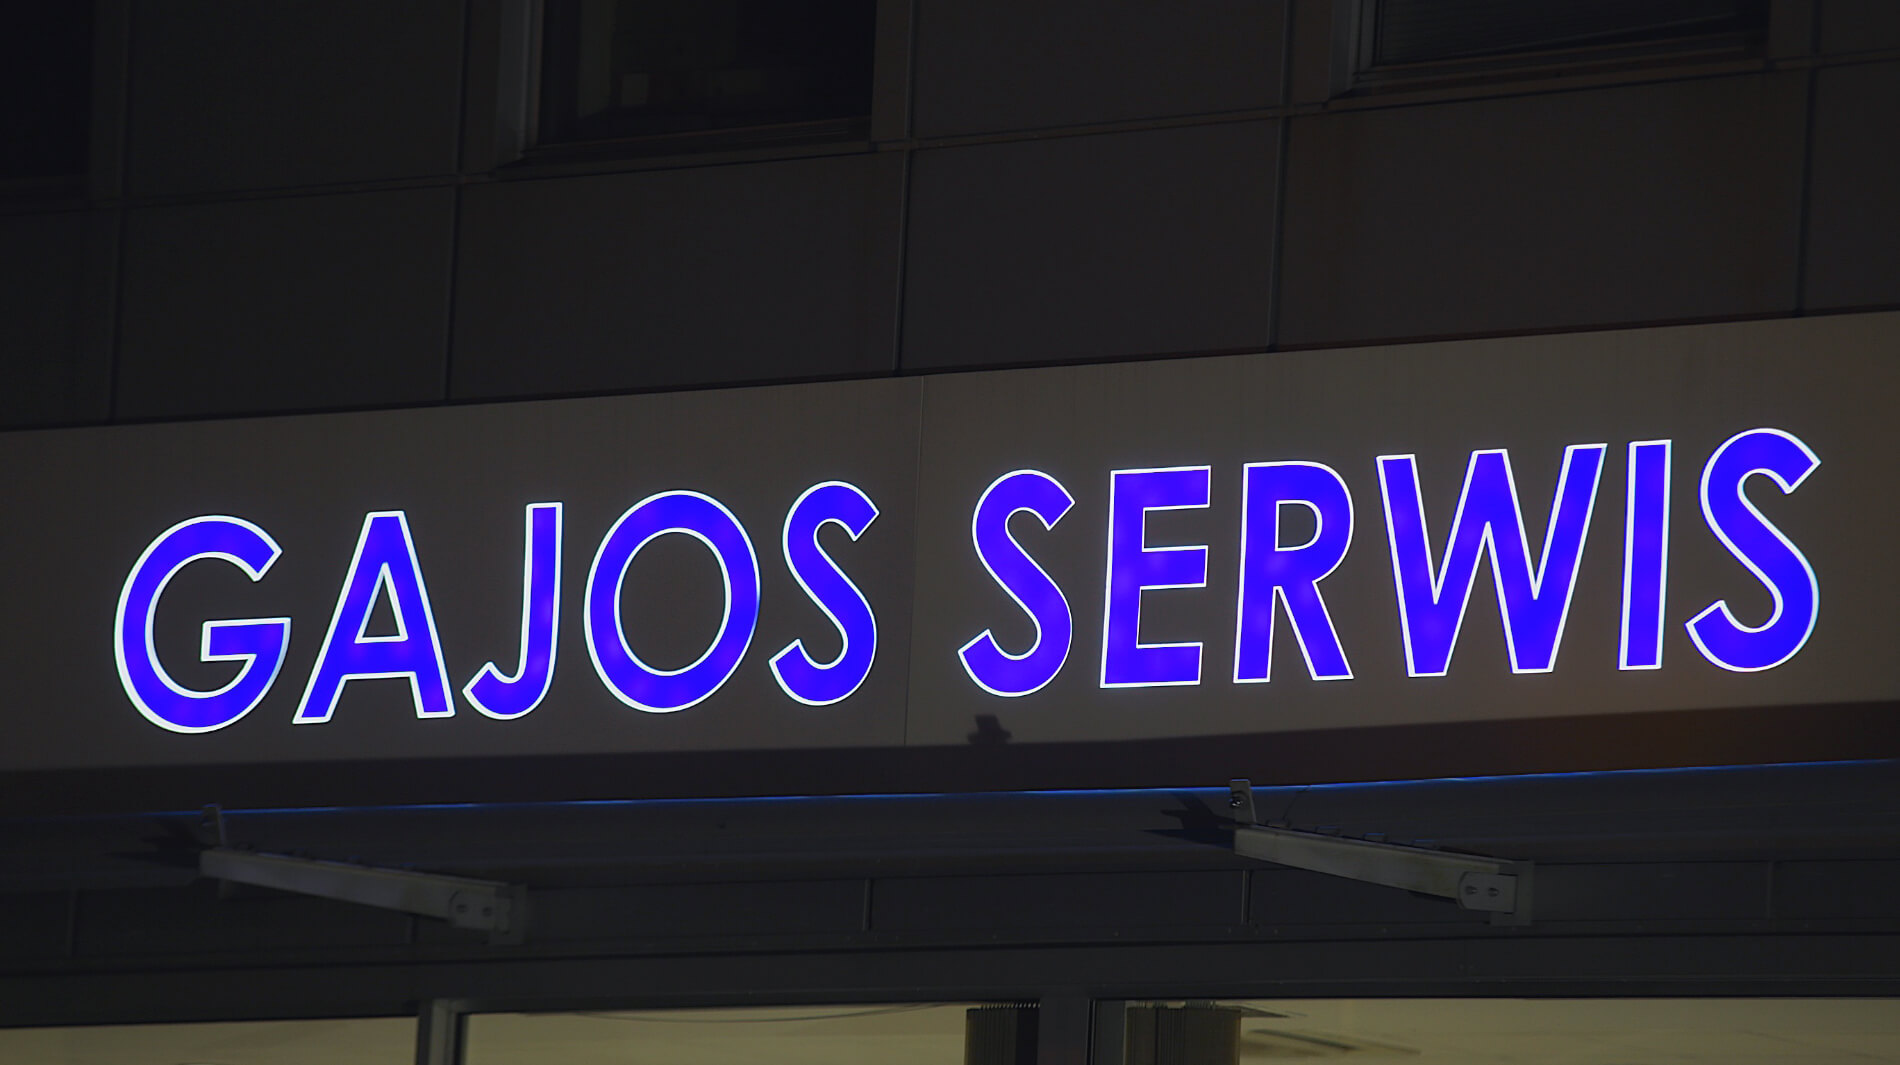 Gajos service - Gajos Serwis - light box with company name, letters illuminated with translucent foil